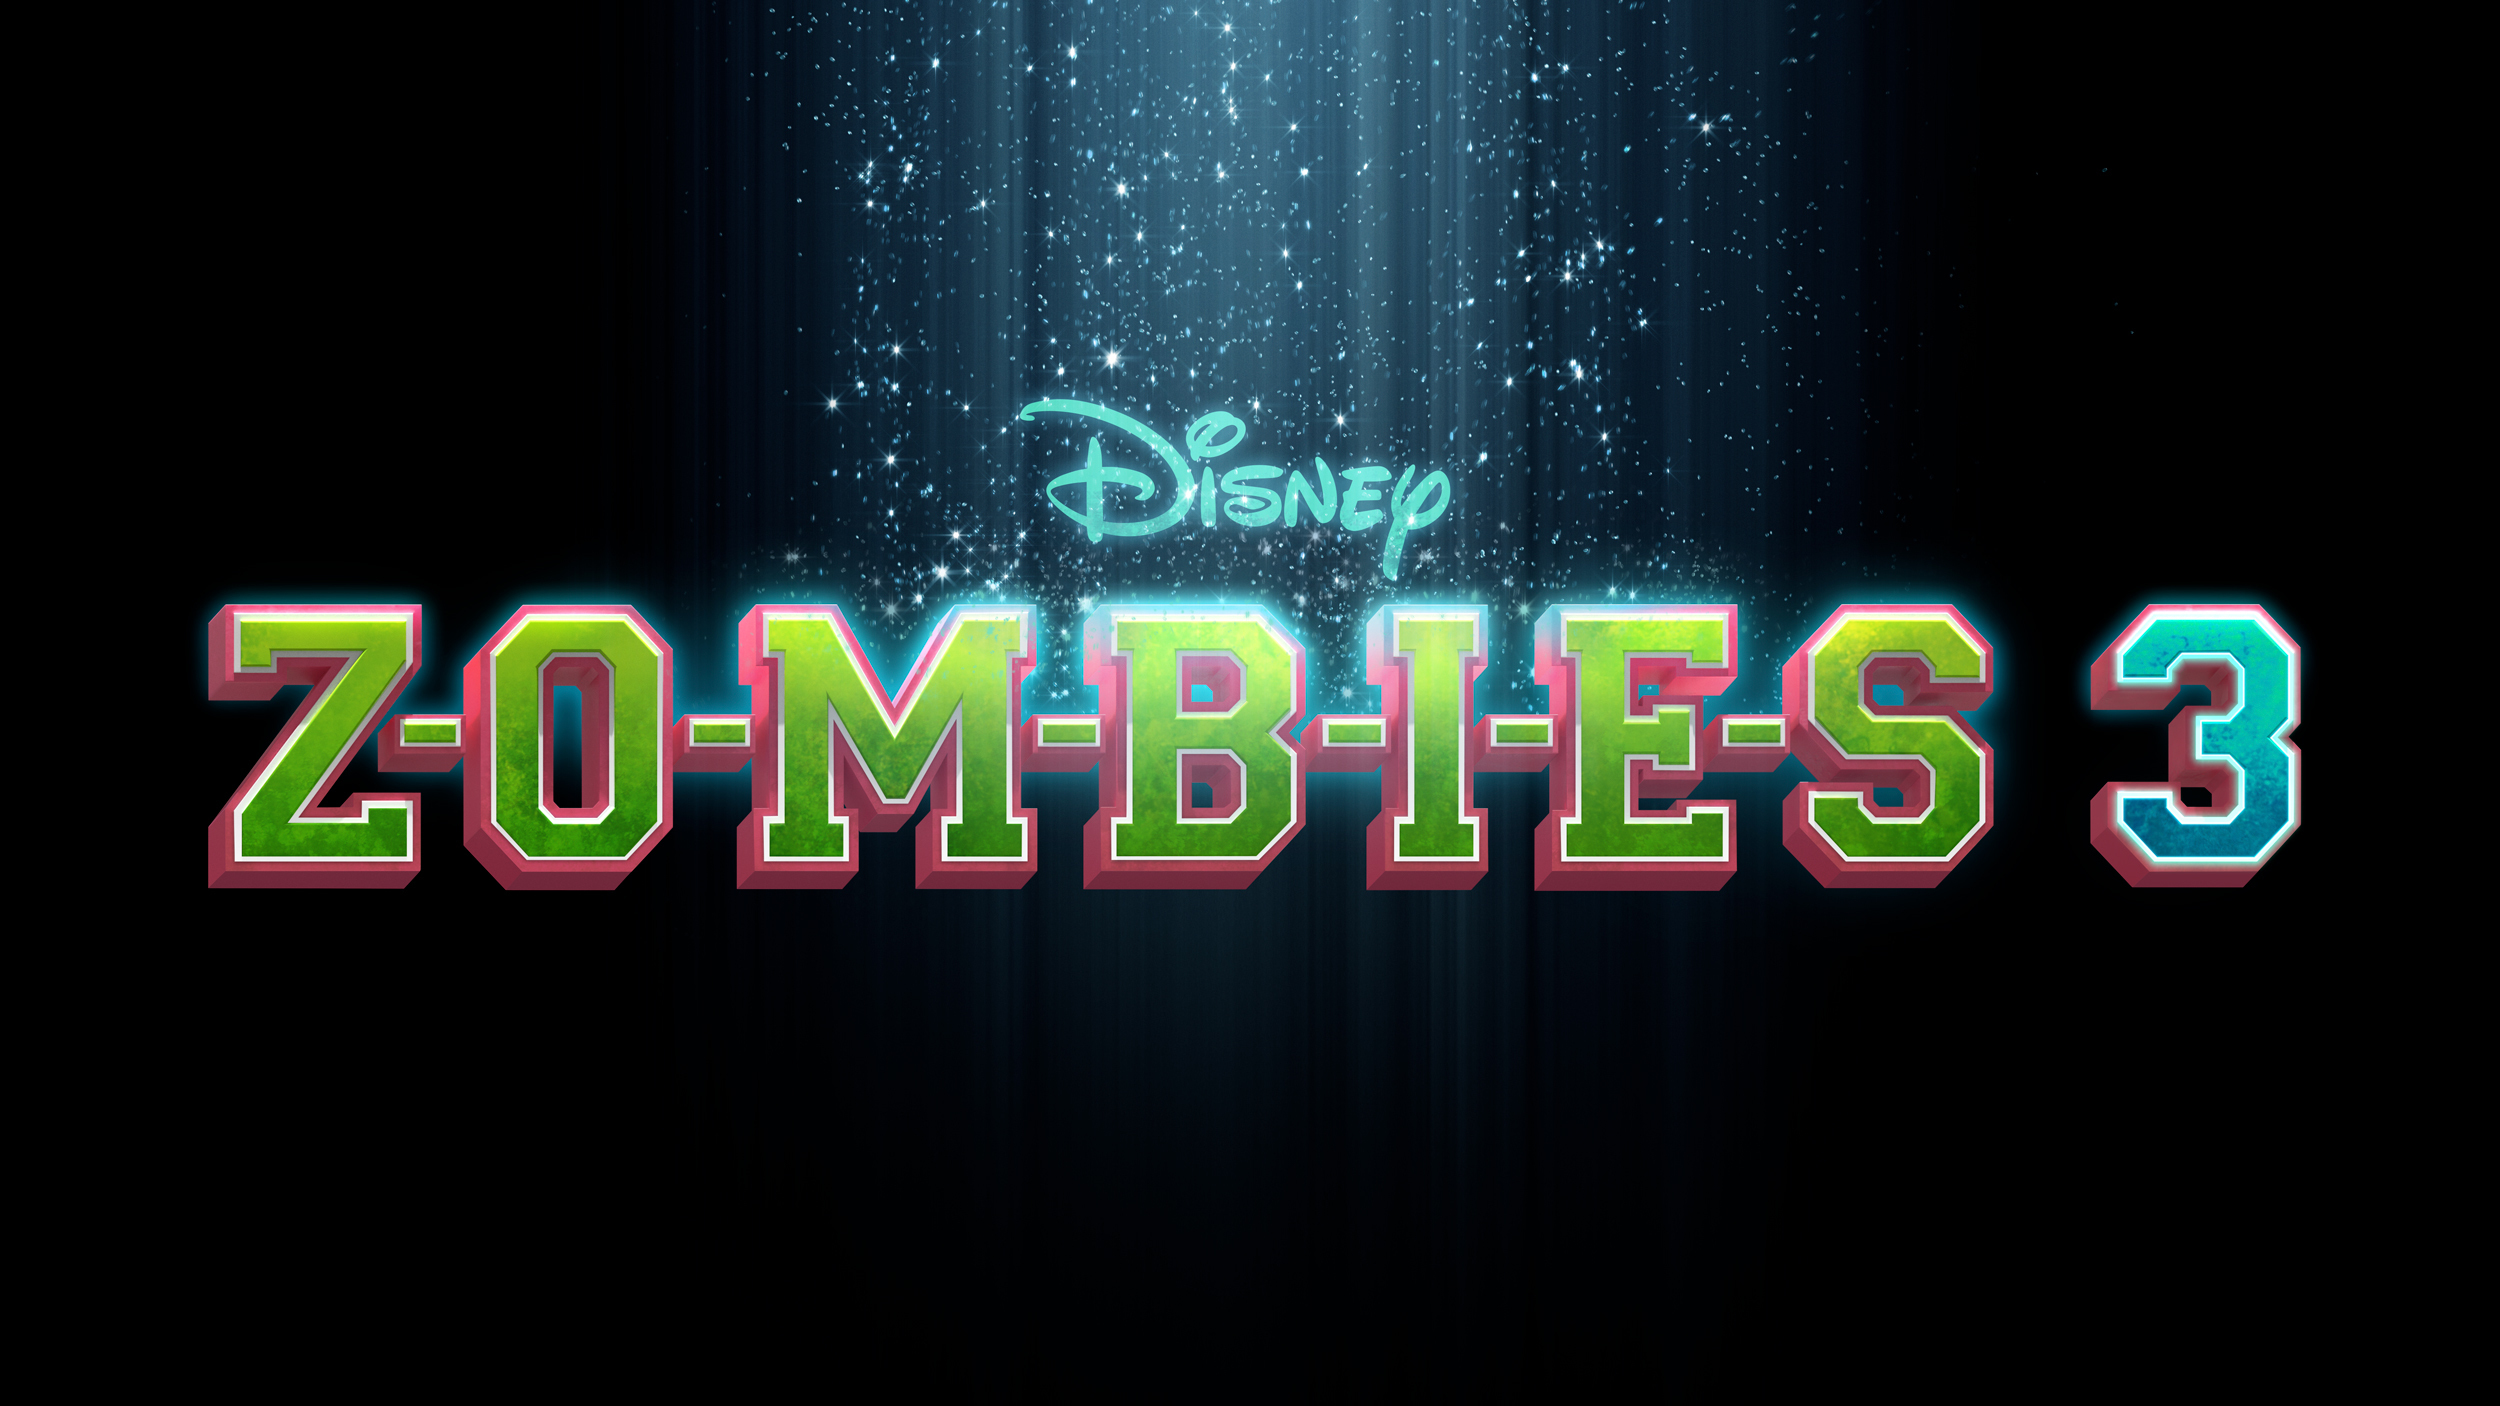 RuPaul joins cast of Disney Channel's upcoming musical film Zombies 3